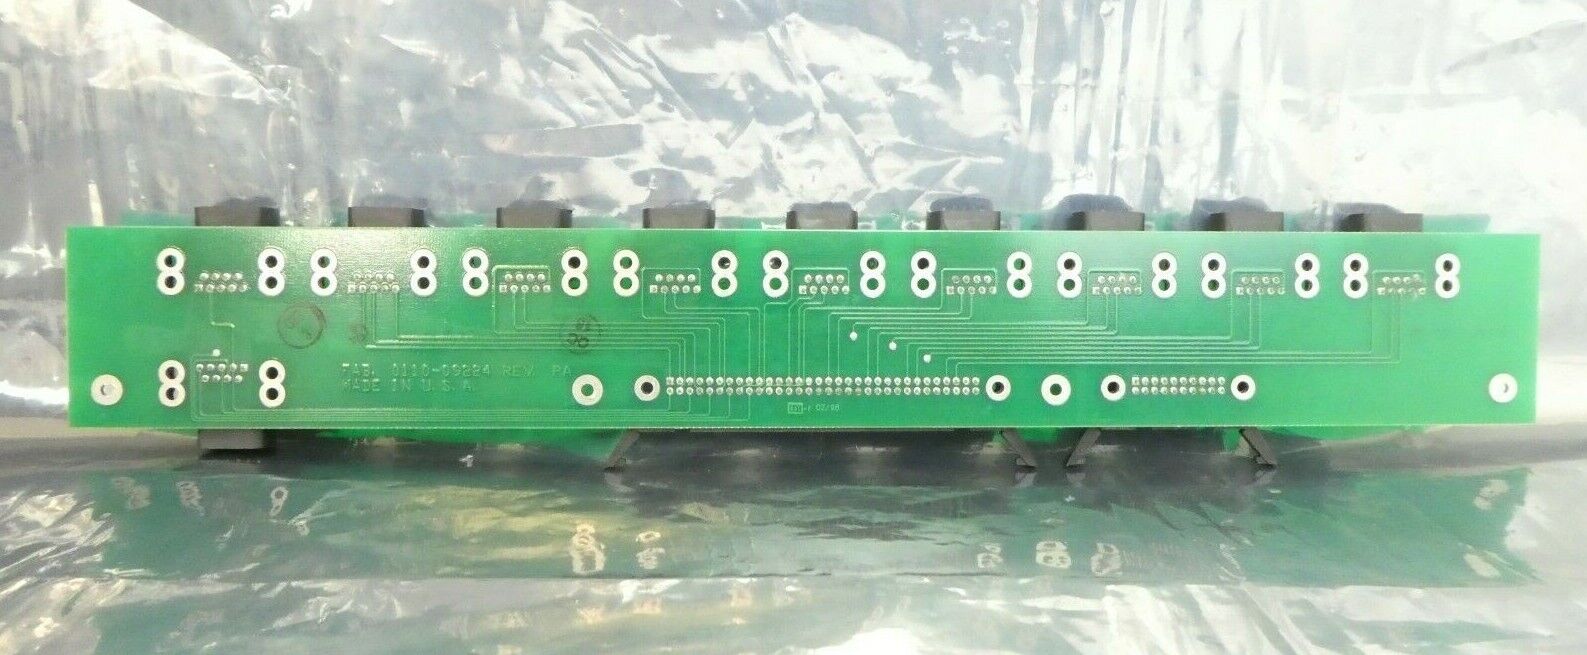 AMAT Applied Materials 0100-09224 RS232 Interconnect PCB P5000 Rev. B Working